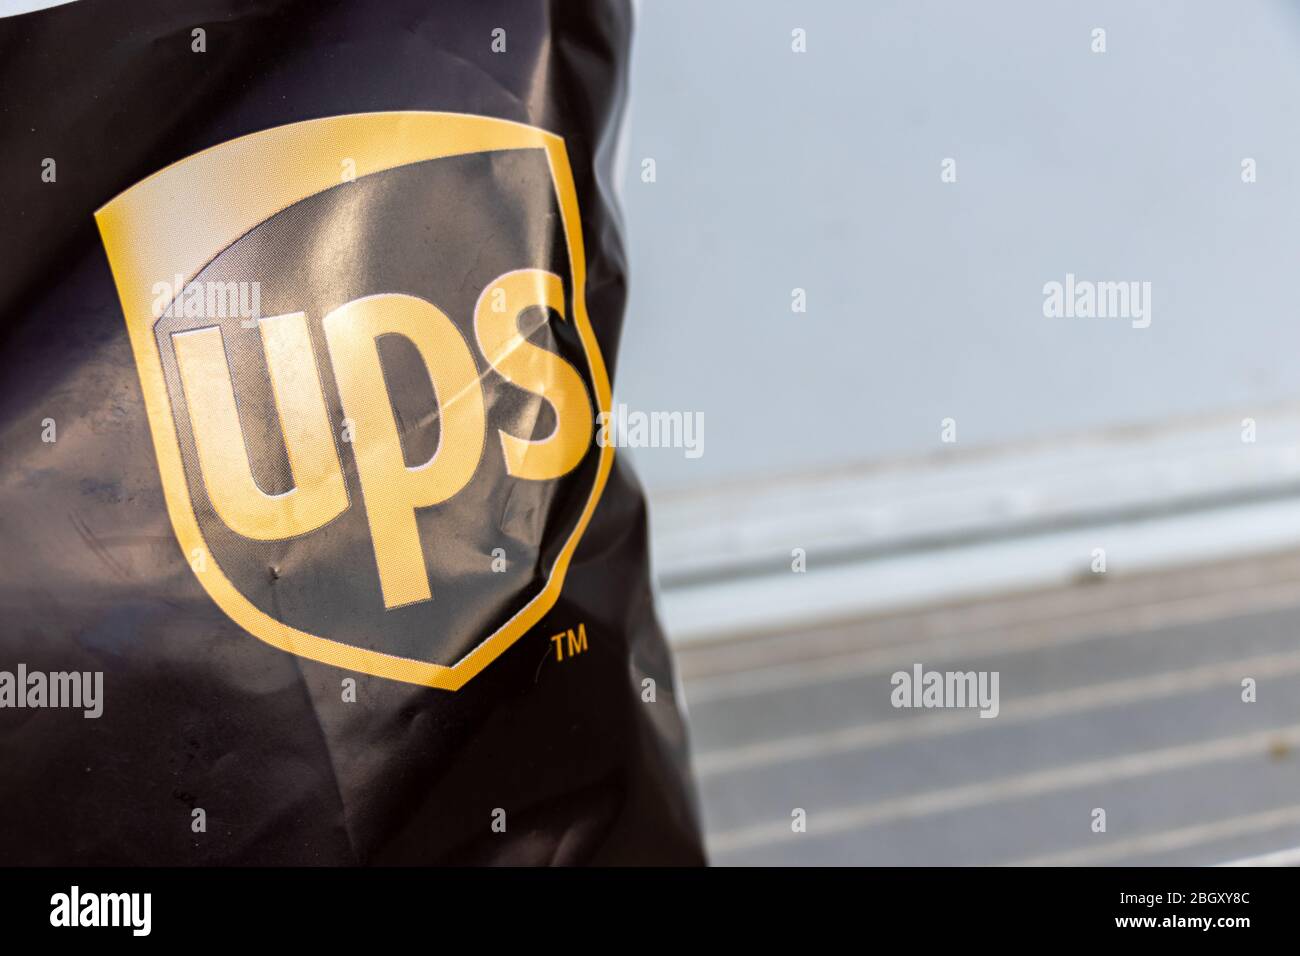 United Parcel Service (UPS) logo on a package delivered to a front door. Stock Photo